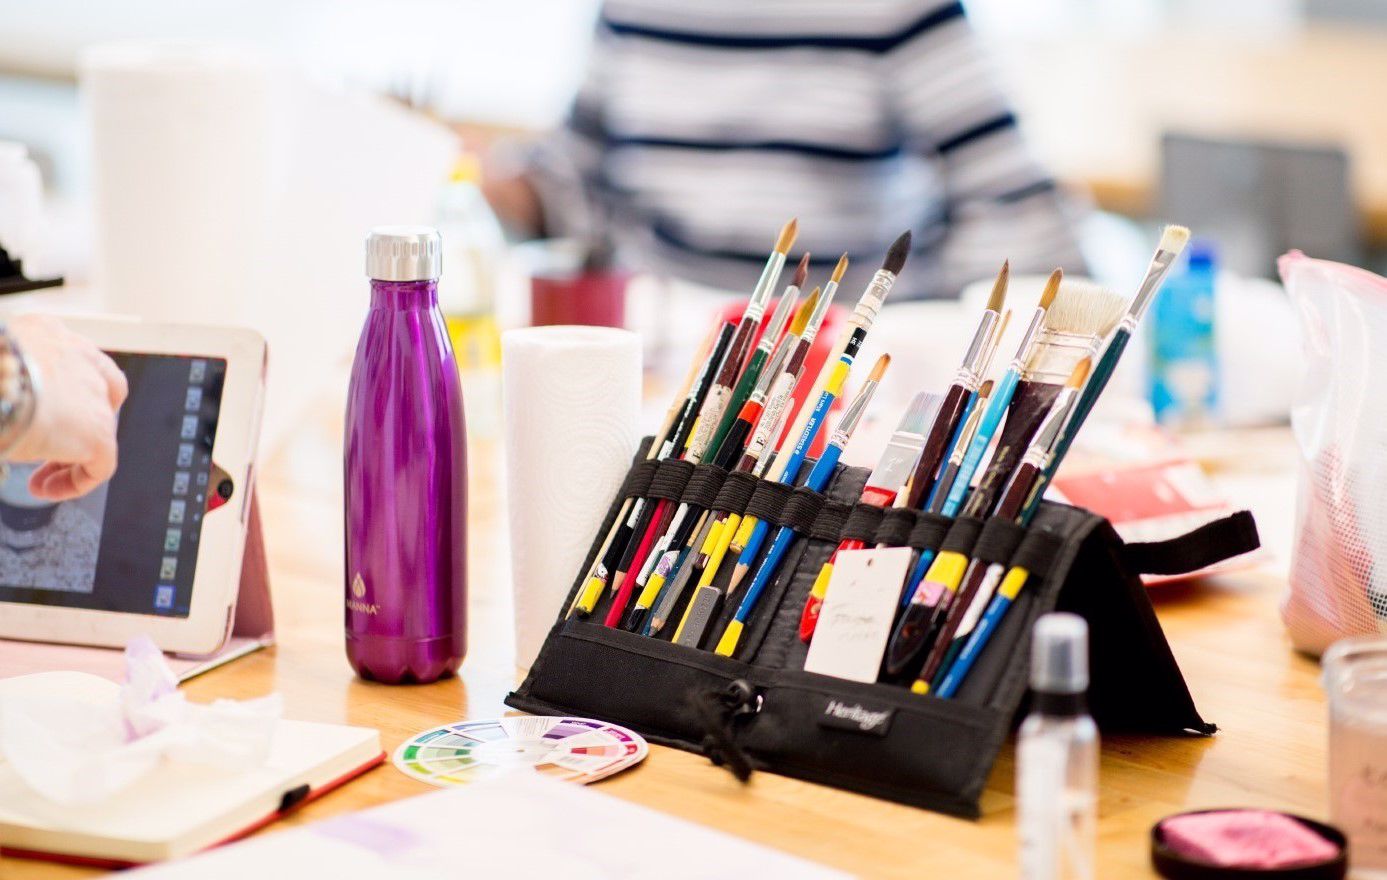 Fall Art Classes for Adults, Inside the MFAH